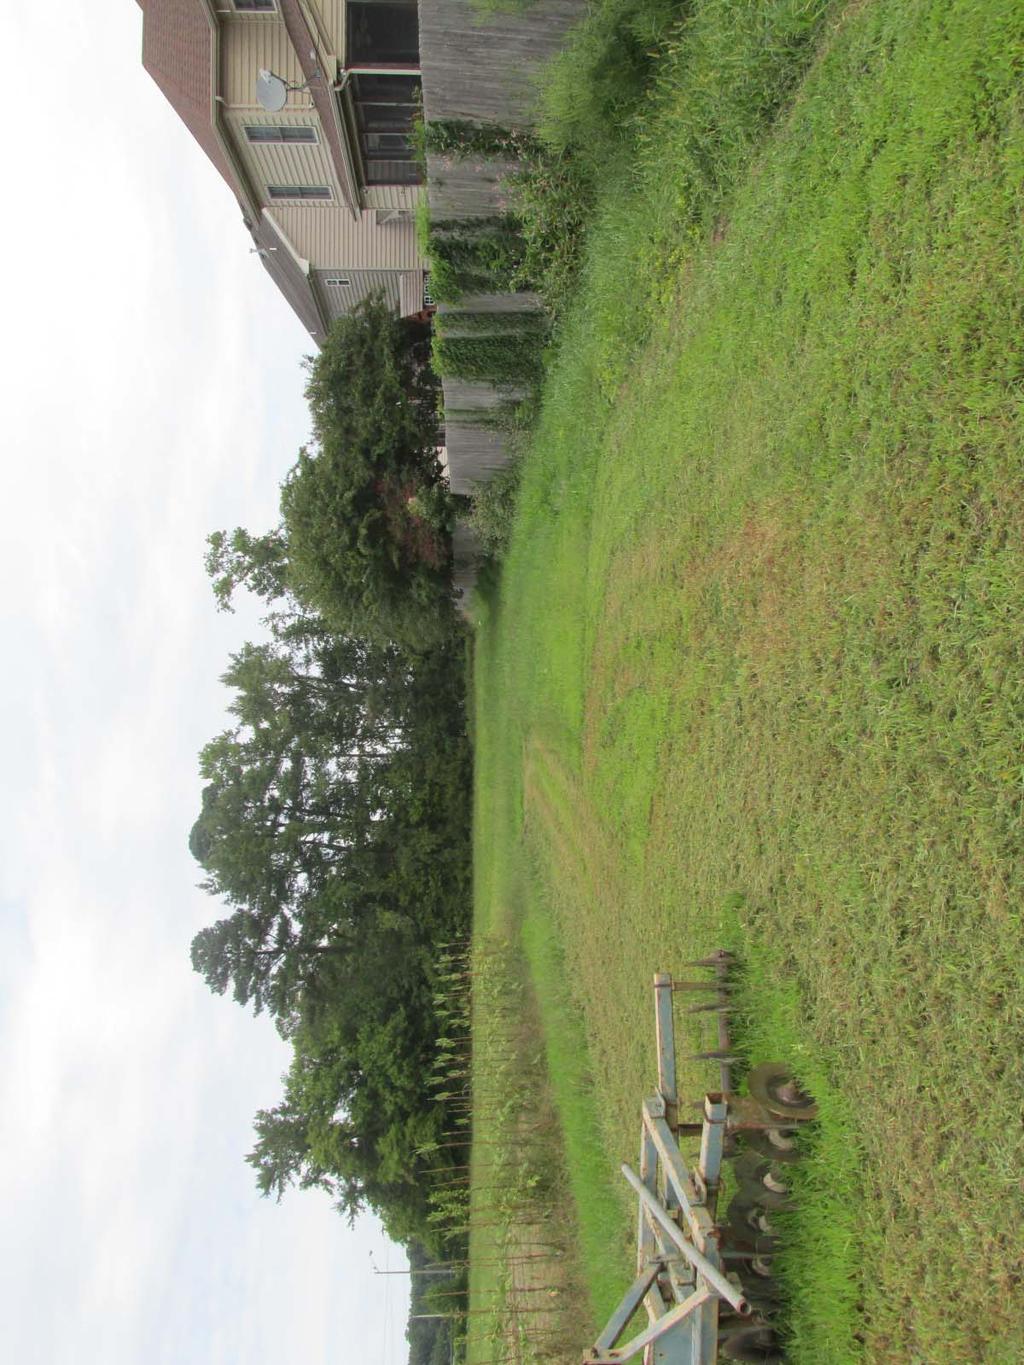 PHOTOGRAPH OF SITE (looking